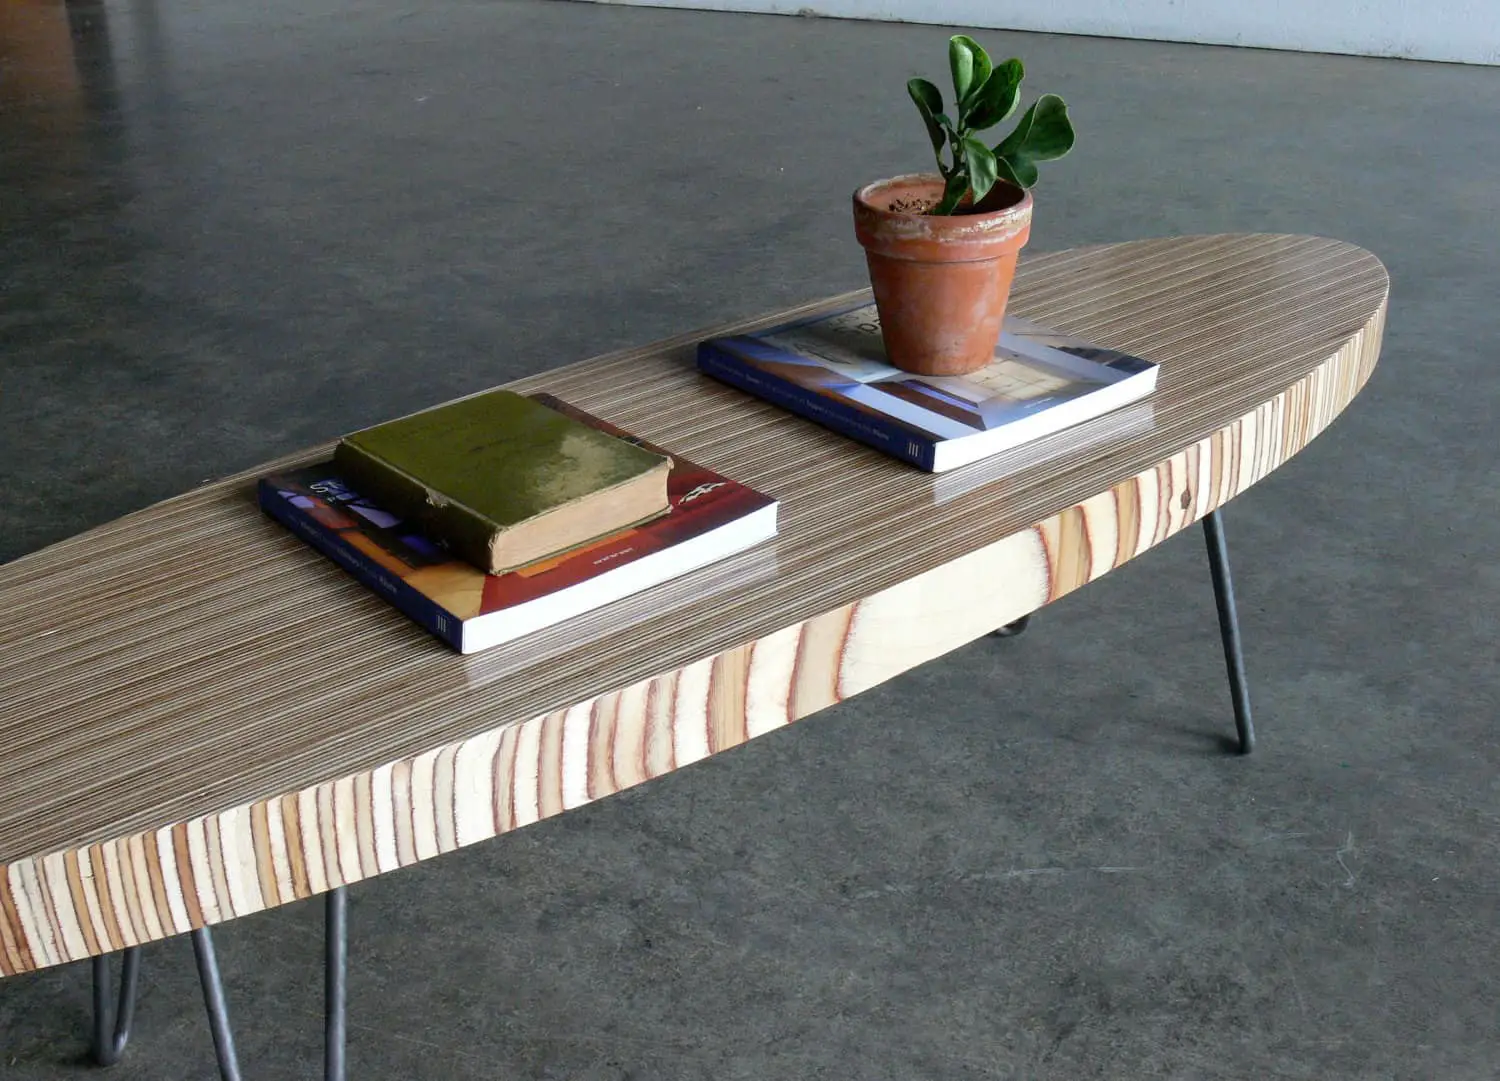 Beach Theme: Surfing Board Inspired Coffee Table